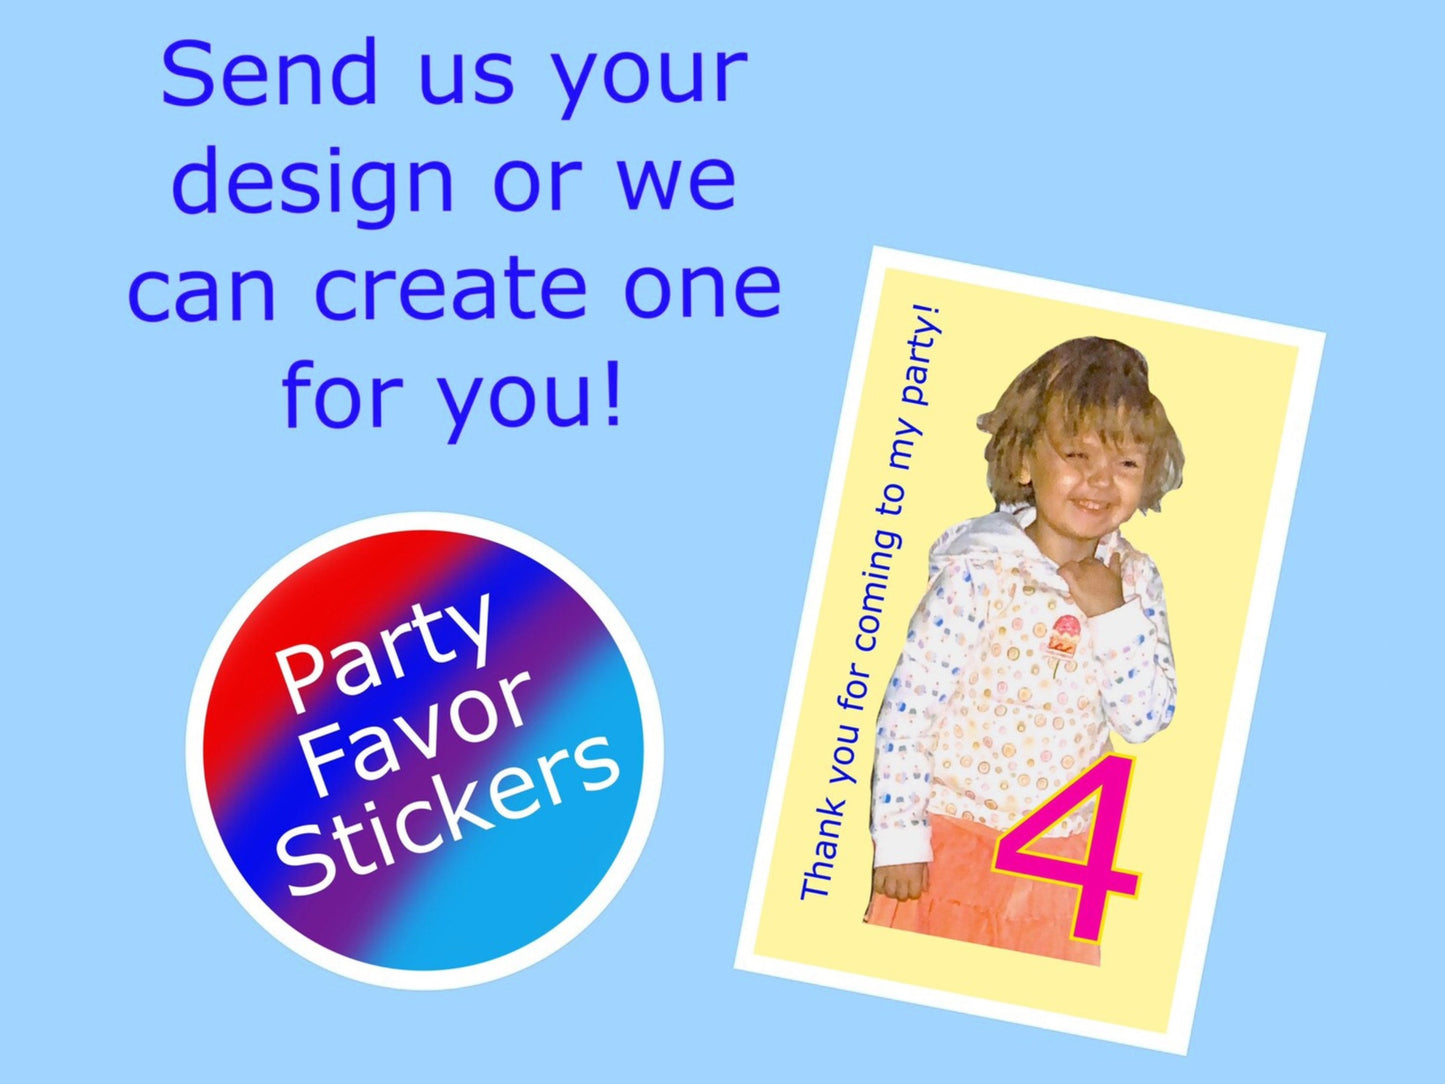 Everyday Paper Stickers- your design - use for party favors, day planners, school supplies and more